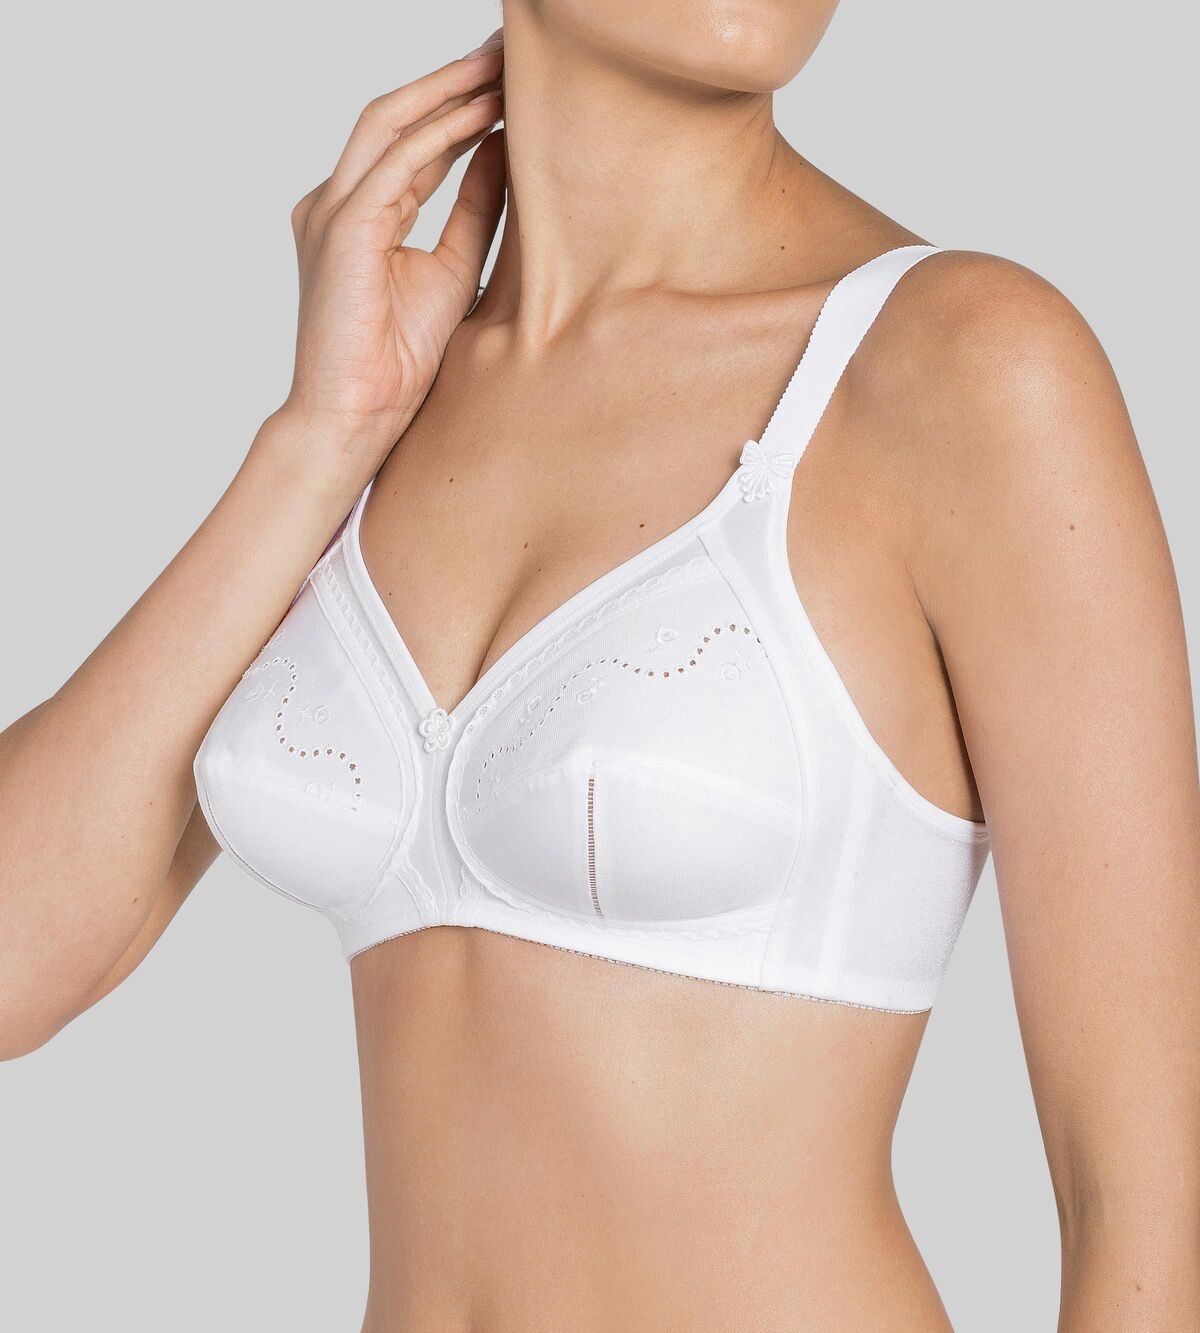 Triumph Doreen Bra Classic Unwired Bras Non Padded Full Cup Firm